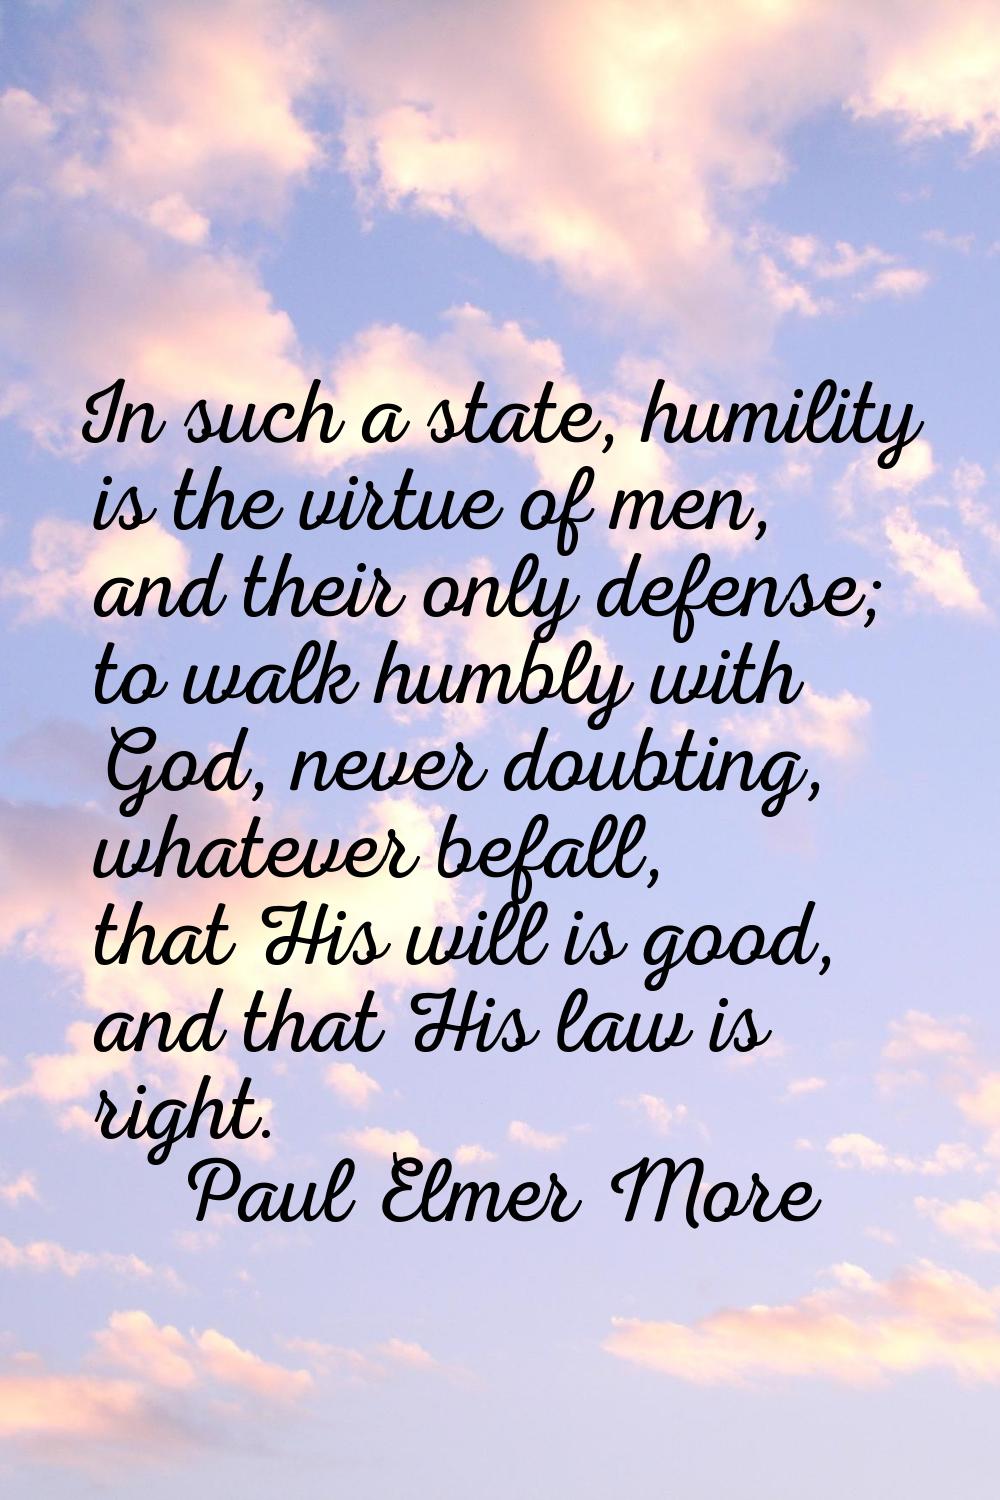 In such a state, humility is the virtue of men, and their only defense; to walk humbly with God, ne